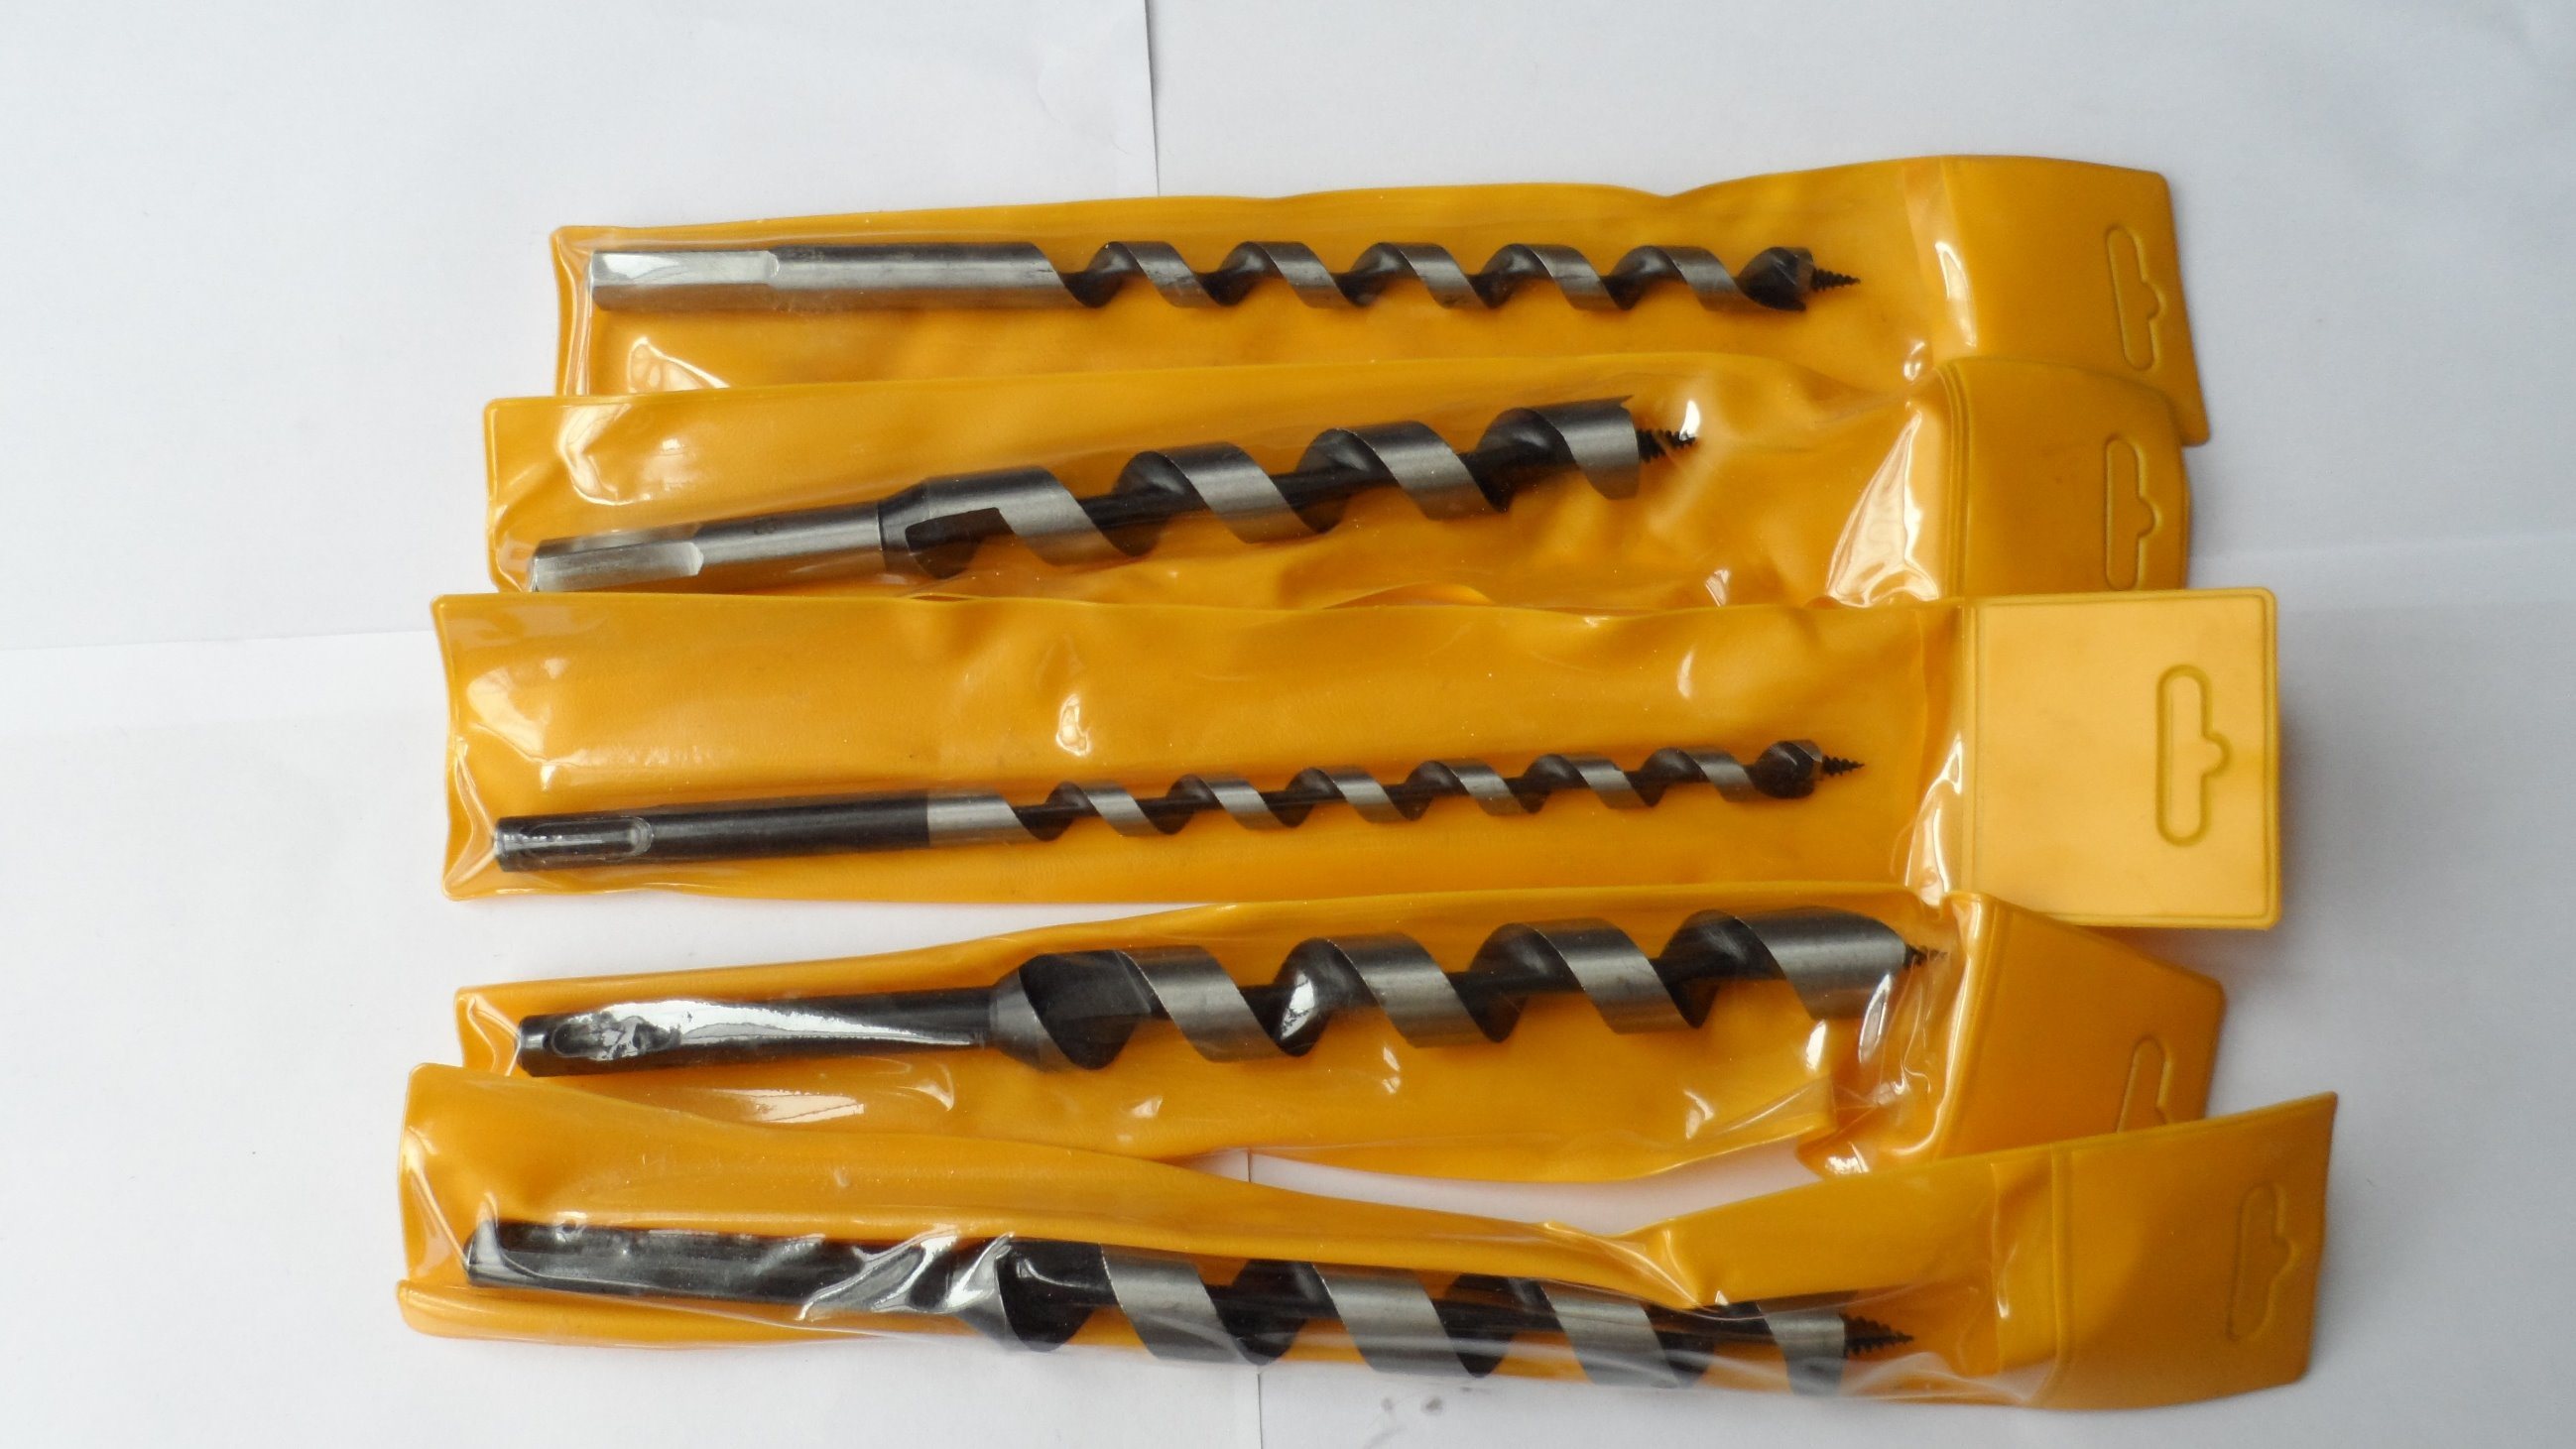 SDS Plus Shank Wood Auger Drill Bits (SED-ADSP)